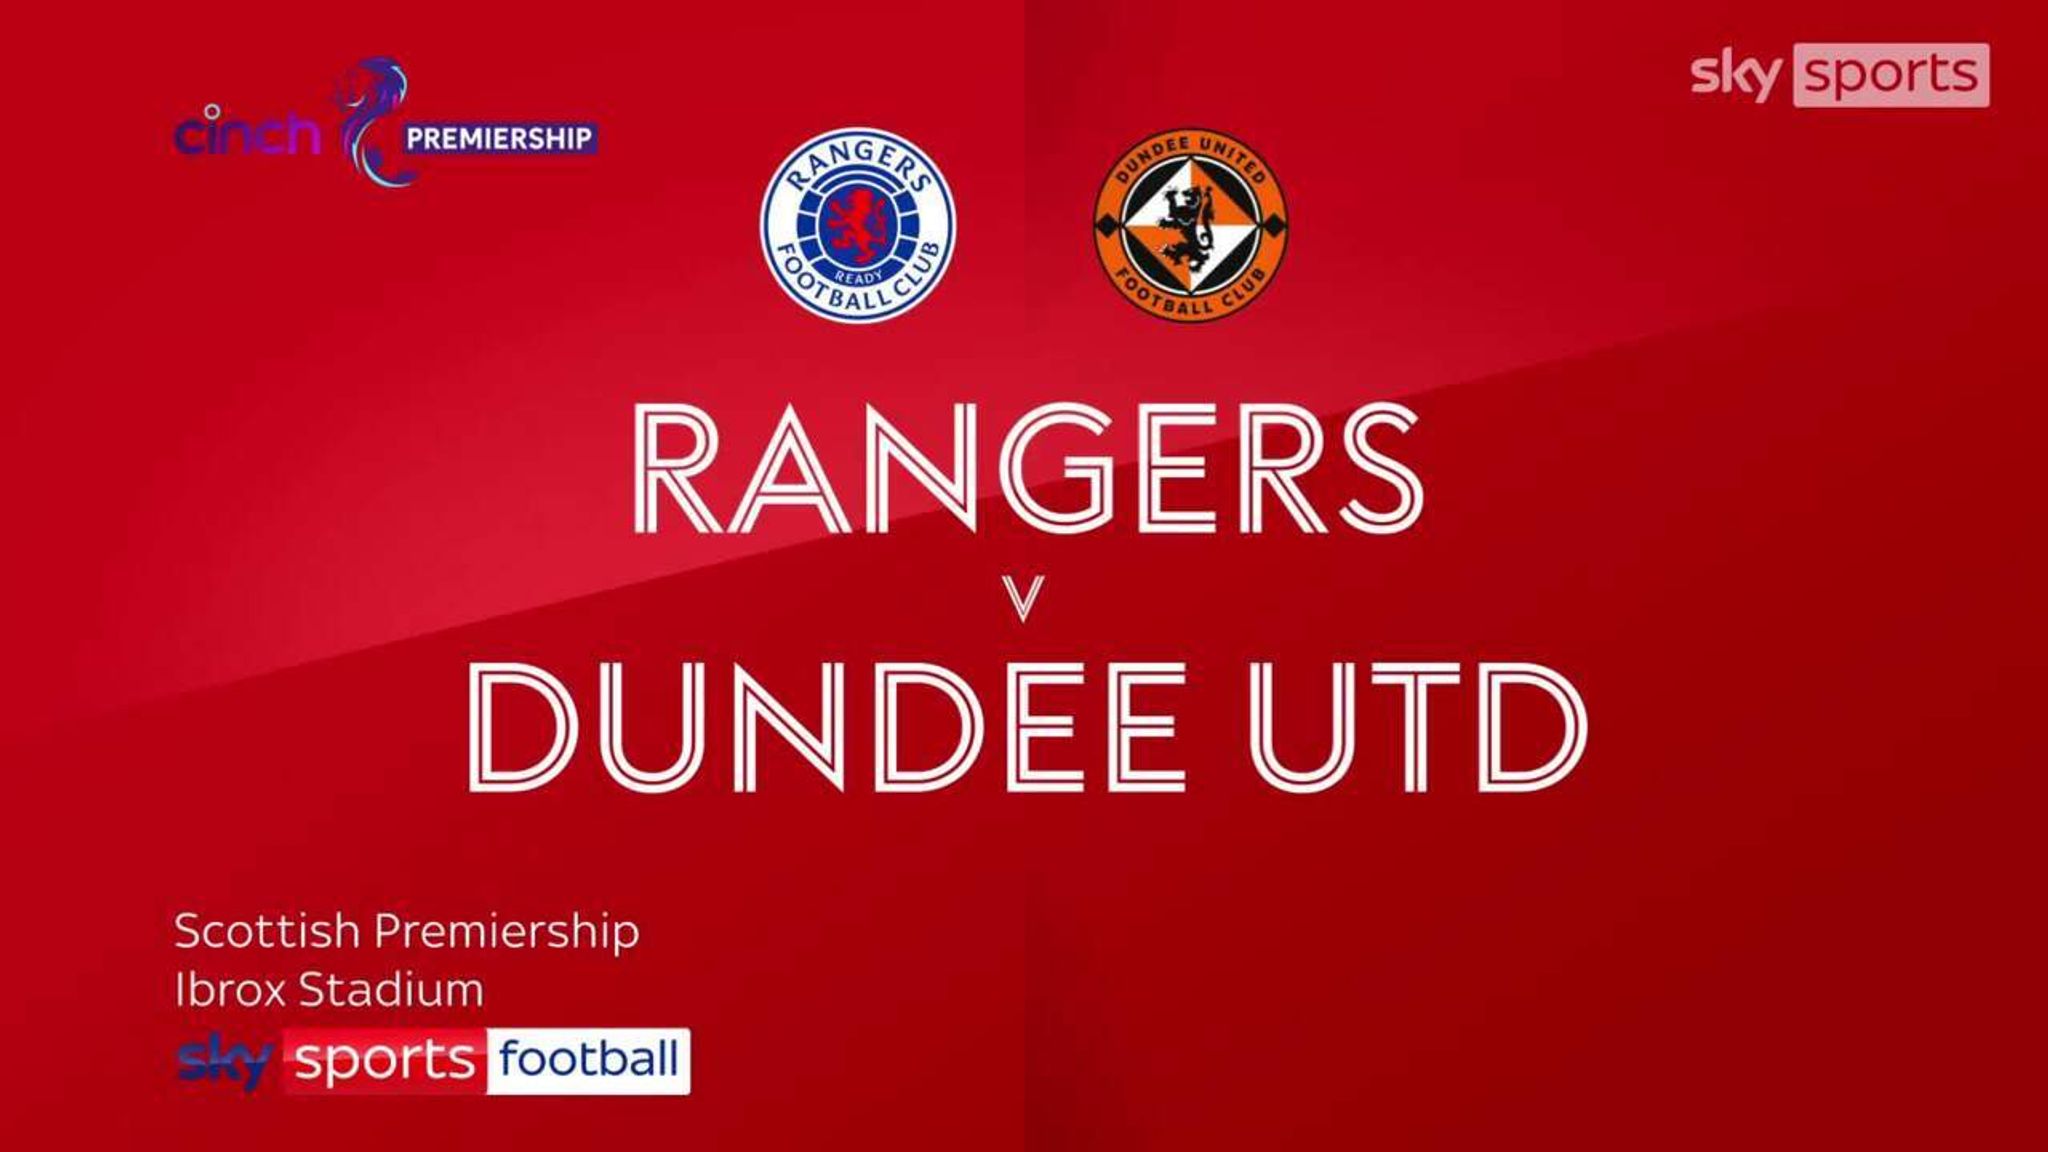 Rangers 2-0 Dundee United Scottish Premiership highlights Video Watch TV Show Sky Sports